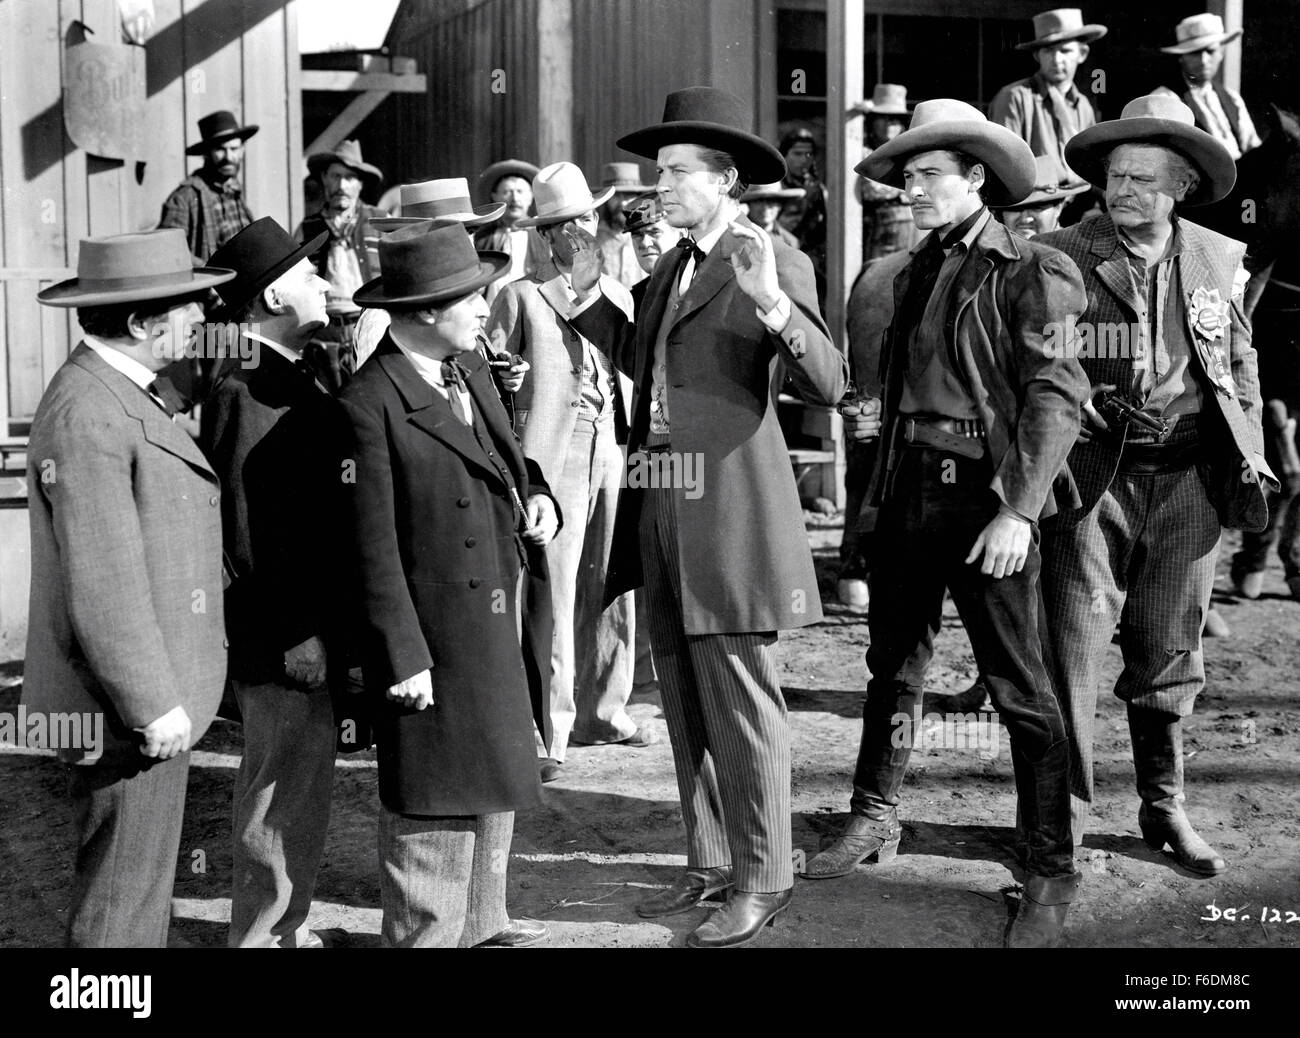 RELEASE DATE: April 8, 1939. MOVIE TITLE: Dodge City. STUDIO: Warner Bros. Pictures. PLOT: Dodge City. A wide-open cattle town run by Jeff Surrett. Even going on a children's Sunday outing is not a safe thing to do. What the place needs is a fearless honest Marshal. A guy like Wade Hatton, who helped bring the railroad in. It may not help that he fancies Abbie Irving, who won't have anything to do with him since he had to shoot her brother. But that's the West. PICTURED: ERROL FLYNN as Wade Hatton. Stock Photo